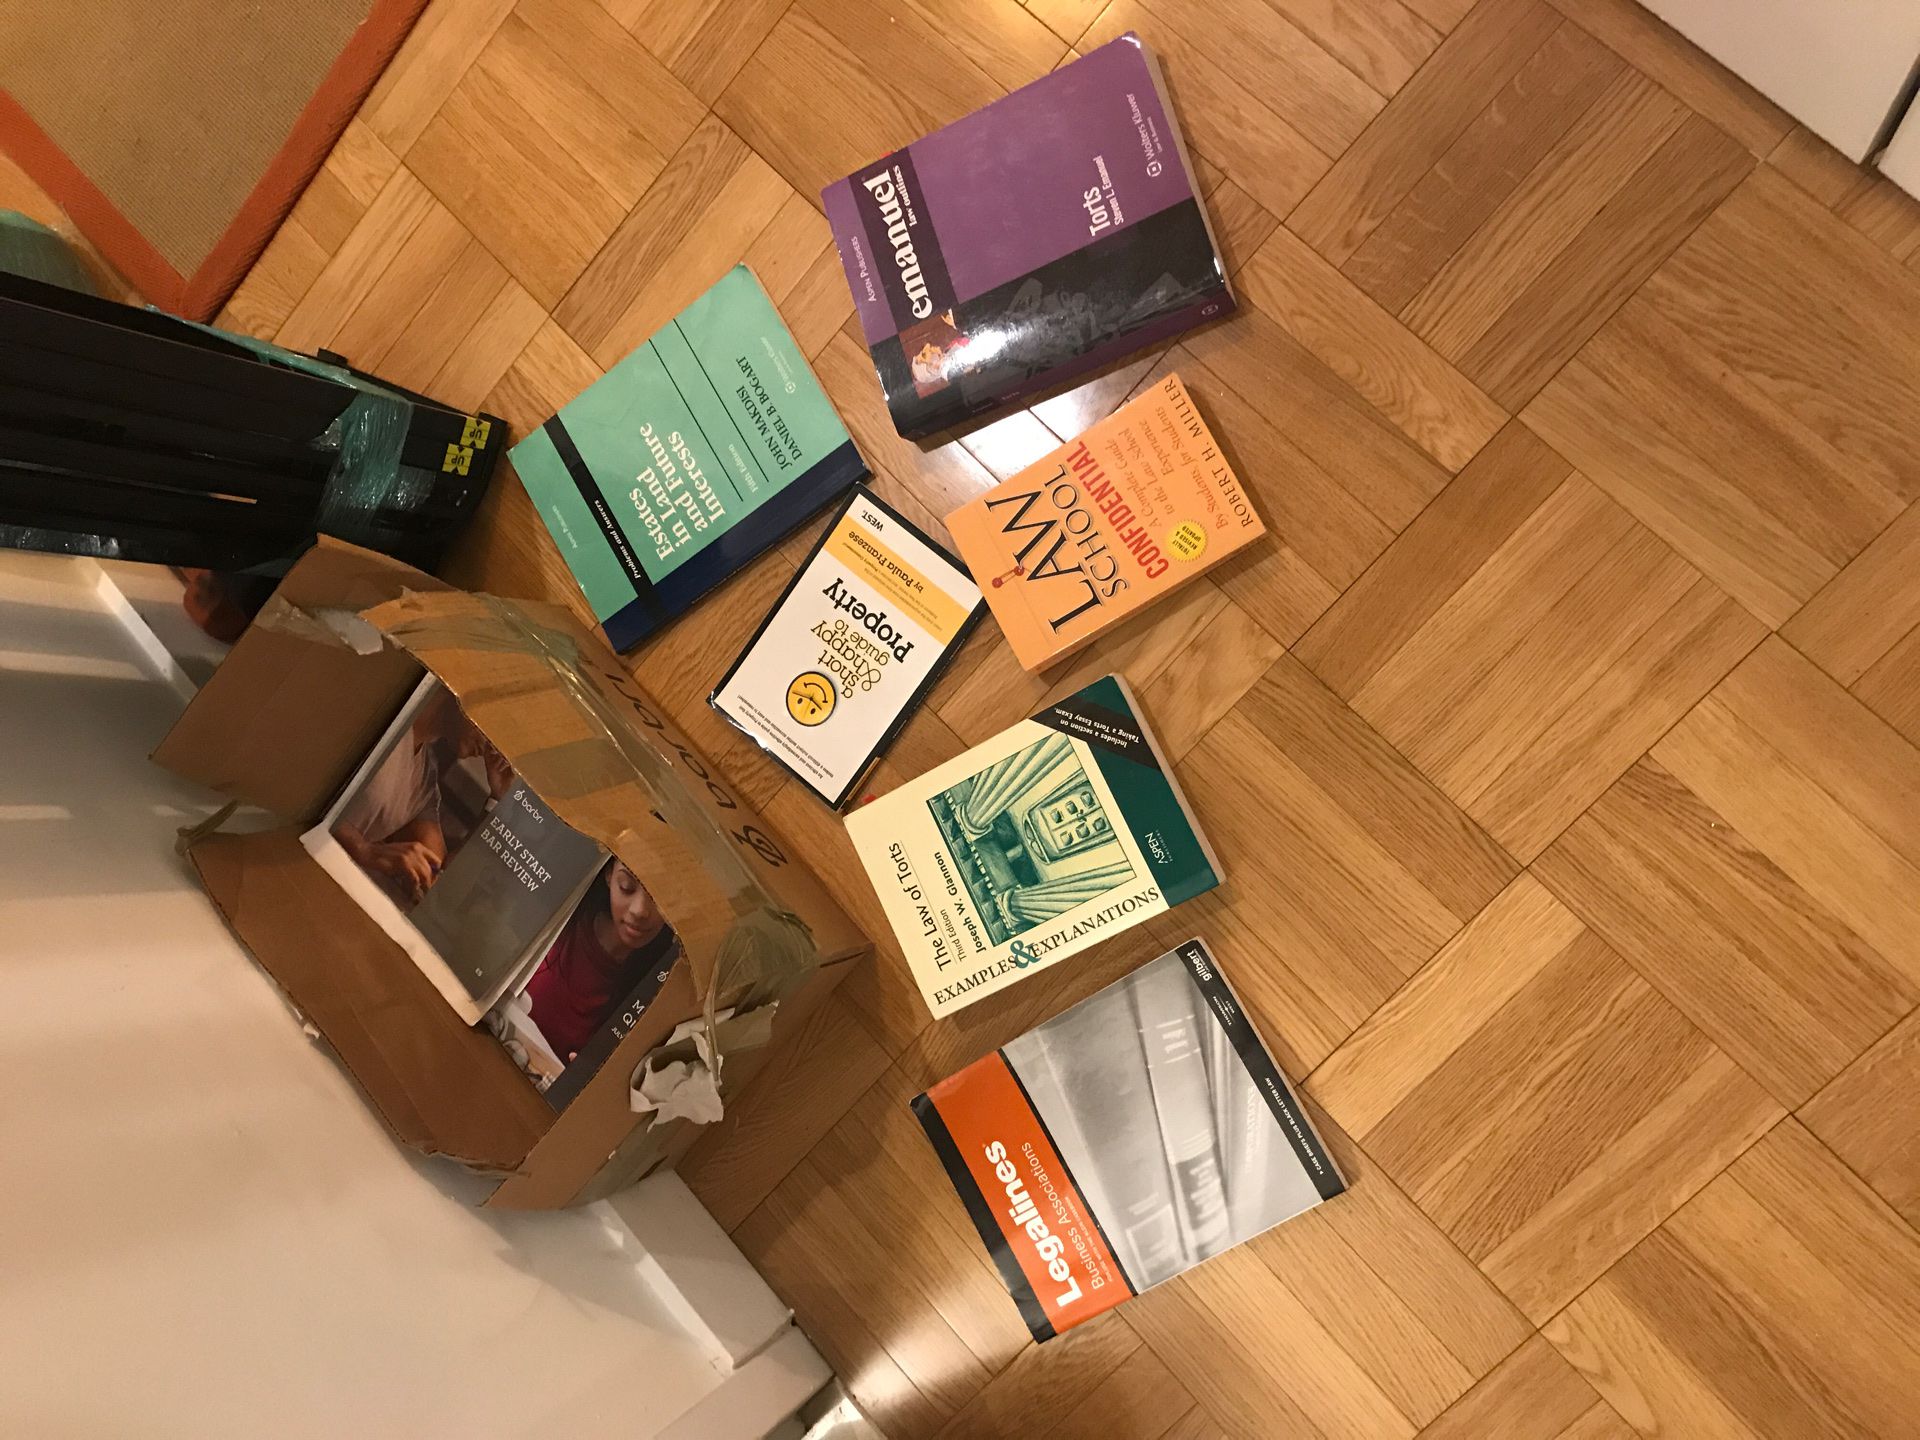 Free Law School Books and Supplements